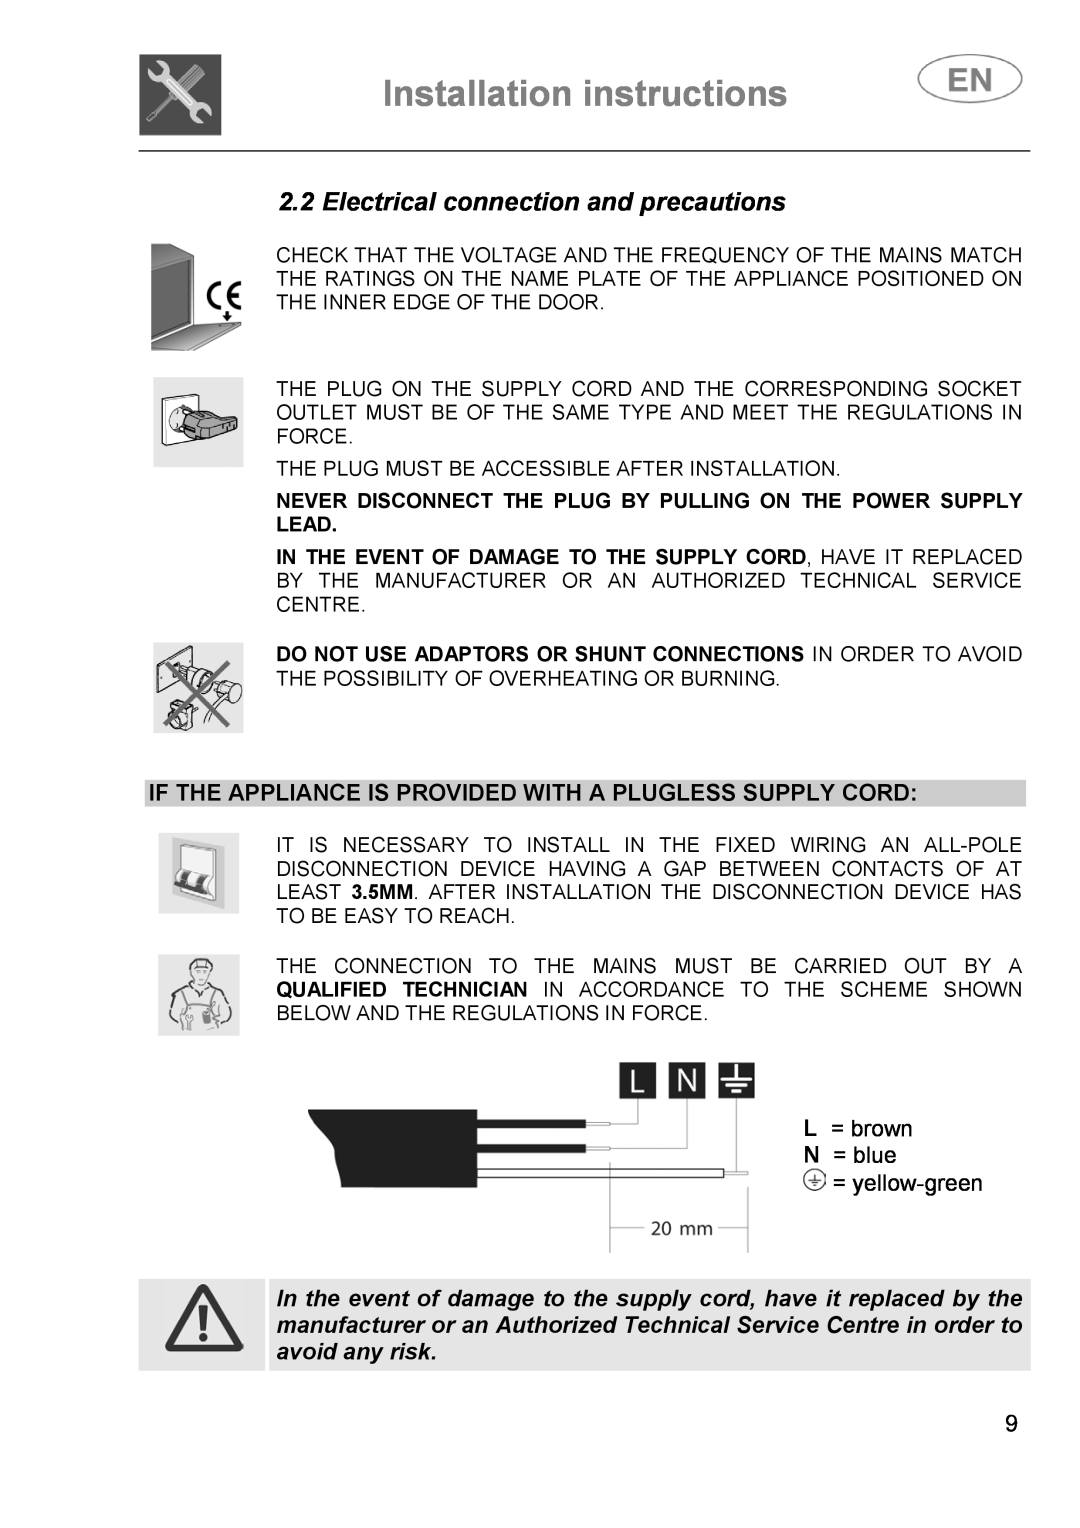 Smeg DI614H instruction manual Electrical connection and precautions, Installation instructions 